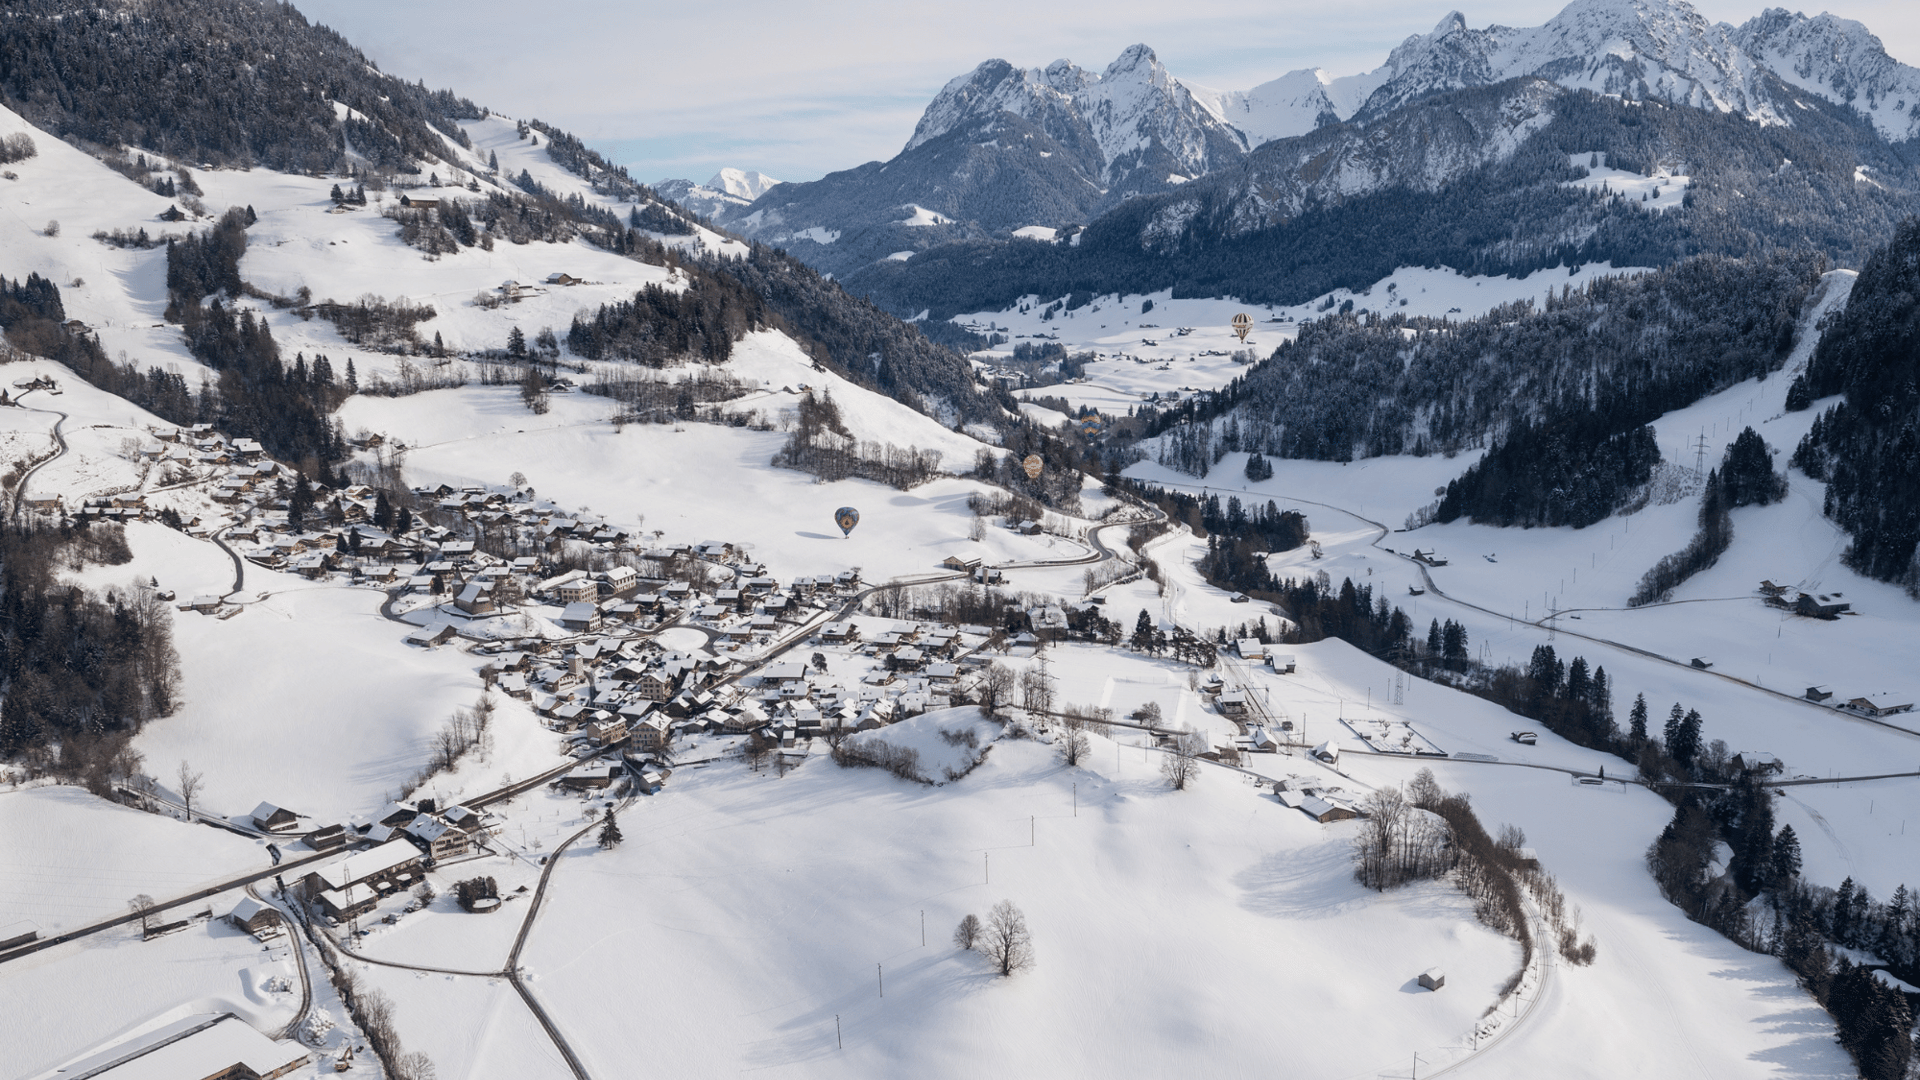 HERO - The village of Rossiniére covered in snow on a winter day from above - Winter